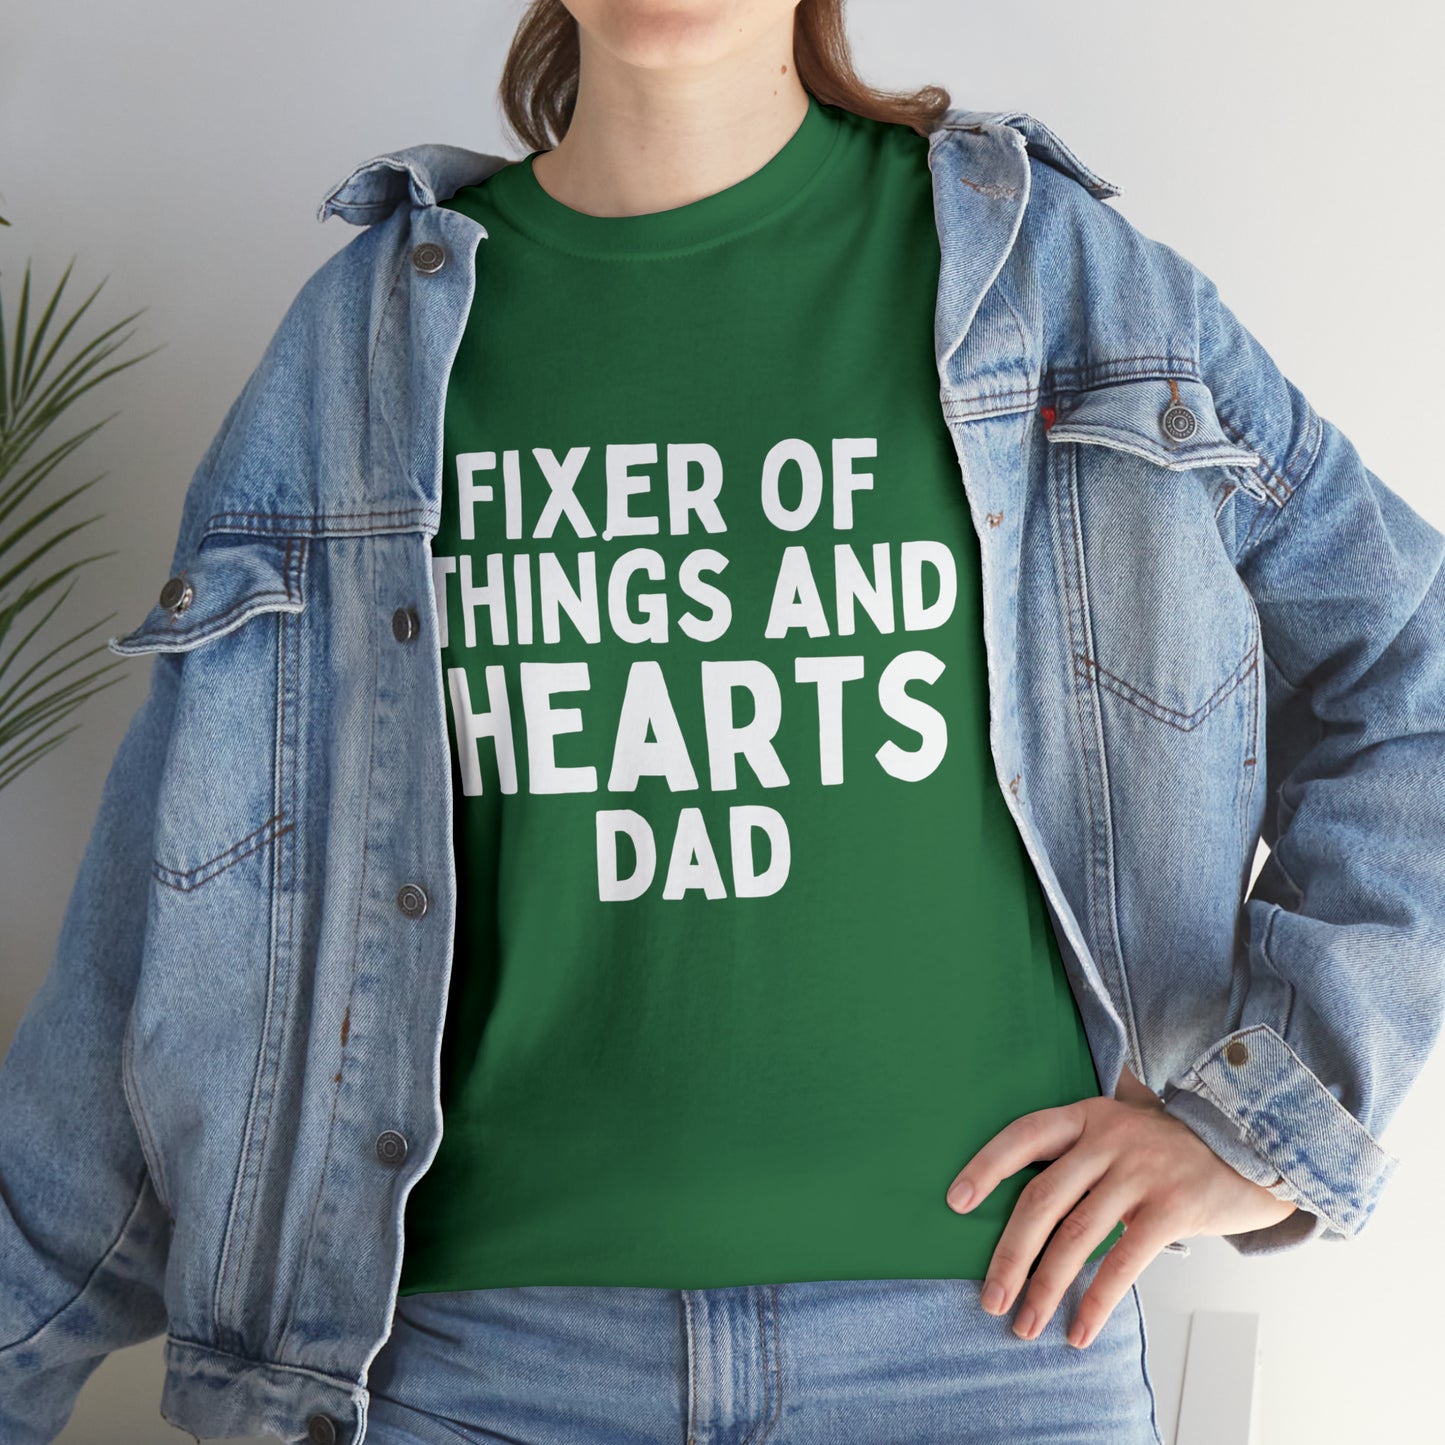 Unisex Jersey Tee: Short Sleeve, "Fixer of Things and Hearts: Dad" Design